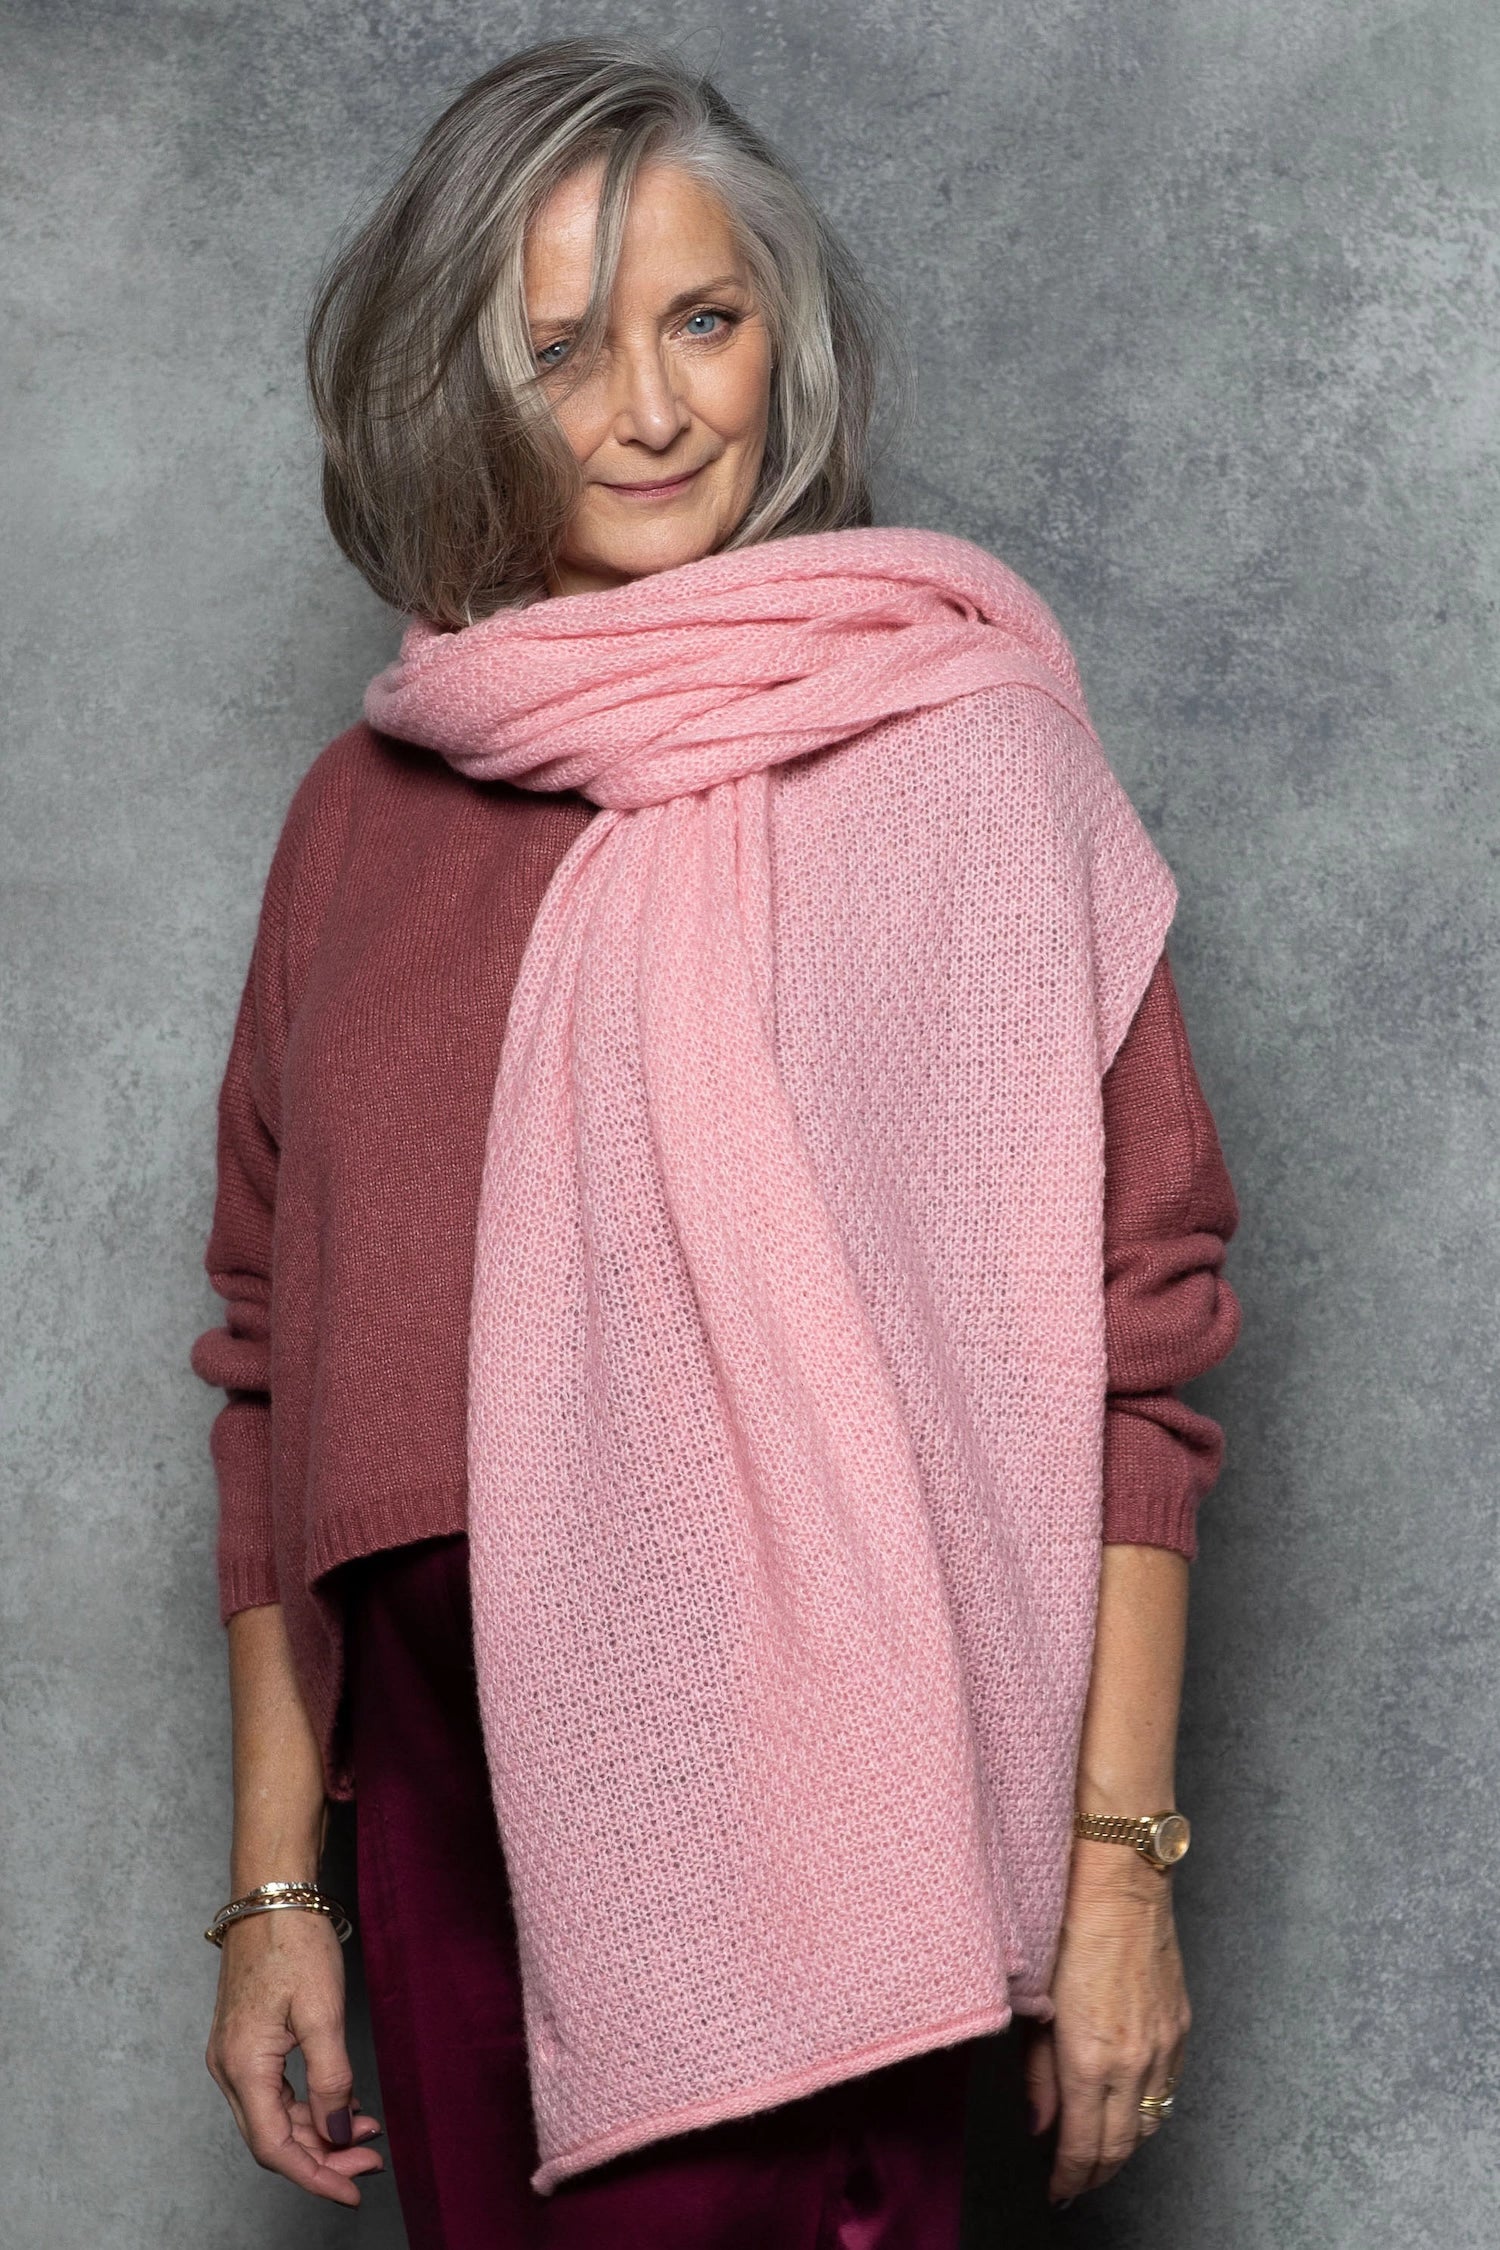 2 Ply Cashmere Scarf Wrap by Citizen Cashmere - Cashmere Mania